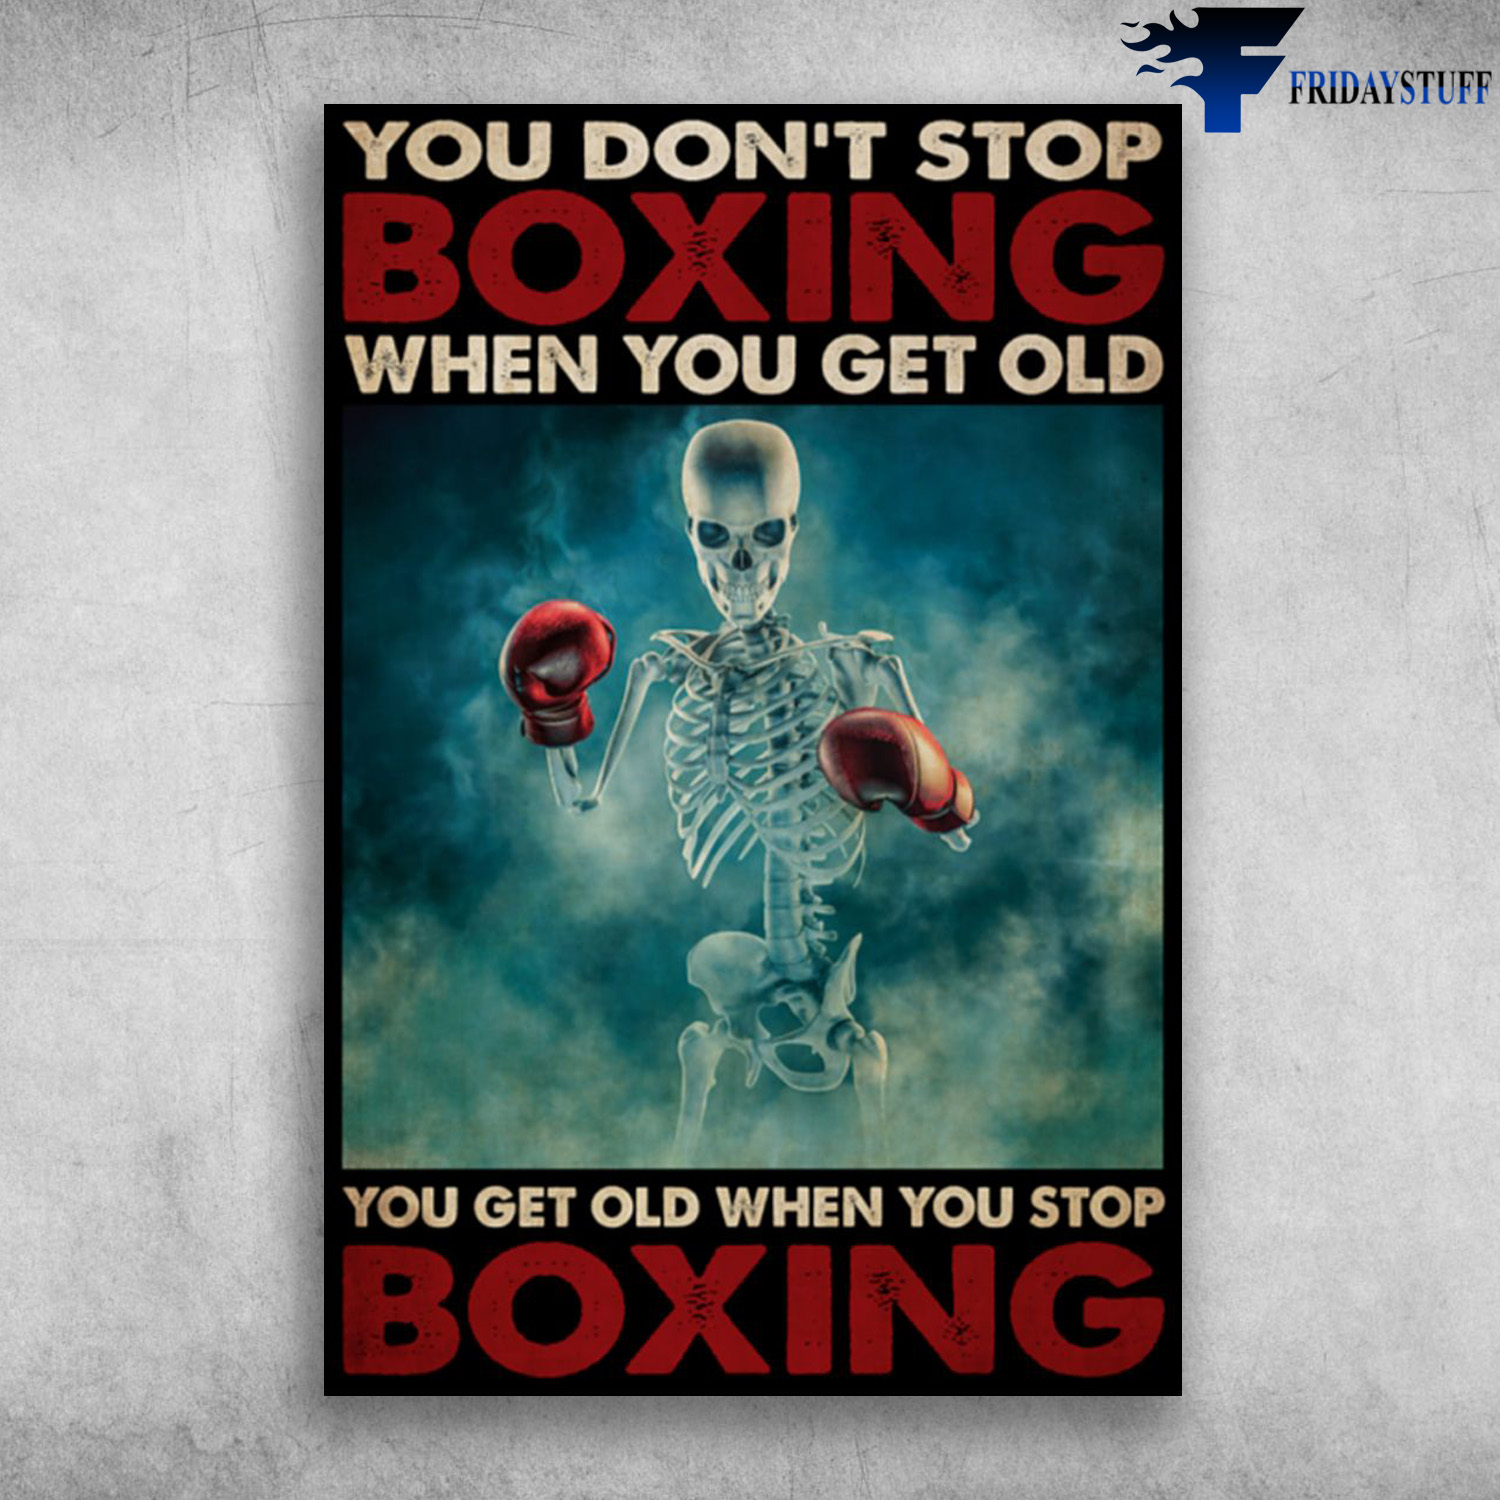 Skeleton Boxing - You Don't Stop Boxing When You Get Old, You Get Old When You Stop Boxing